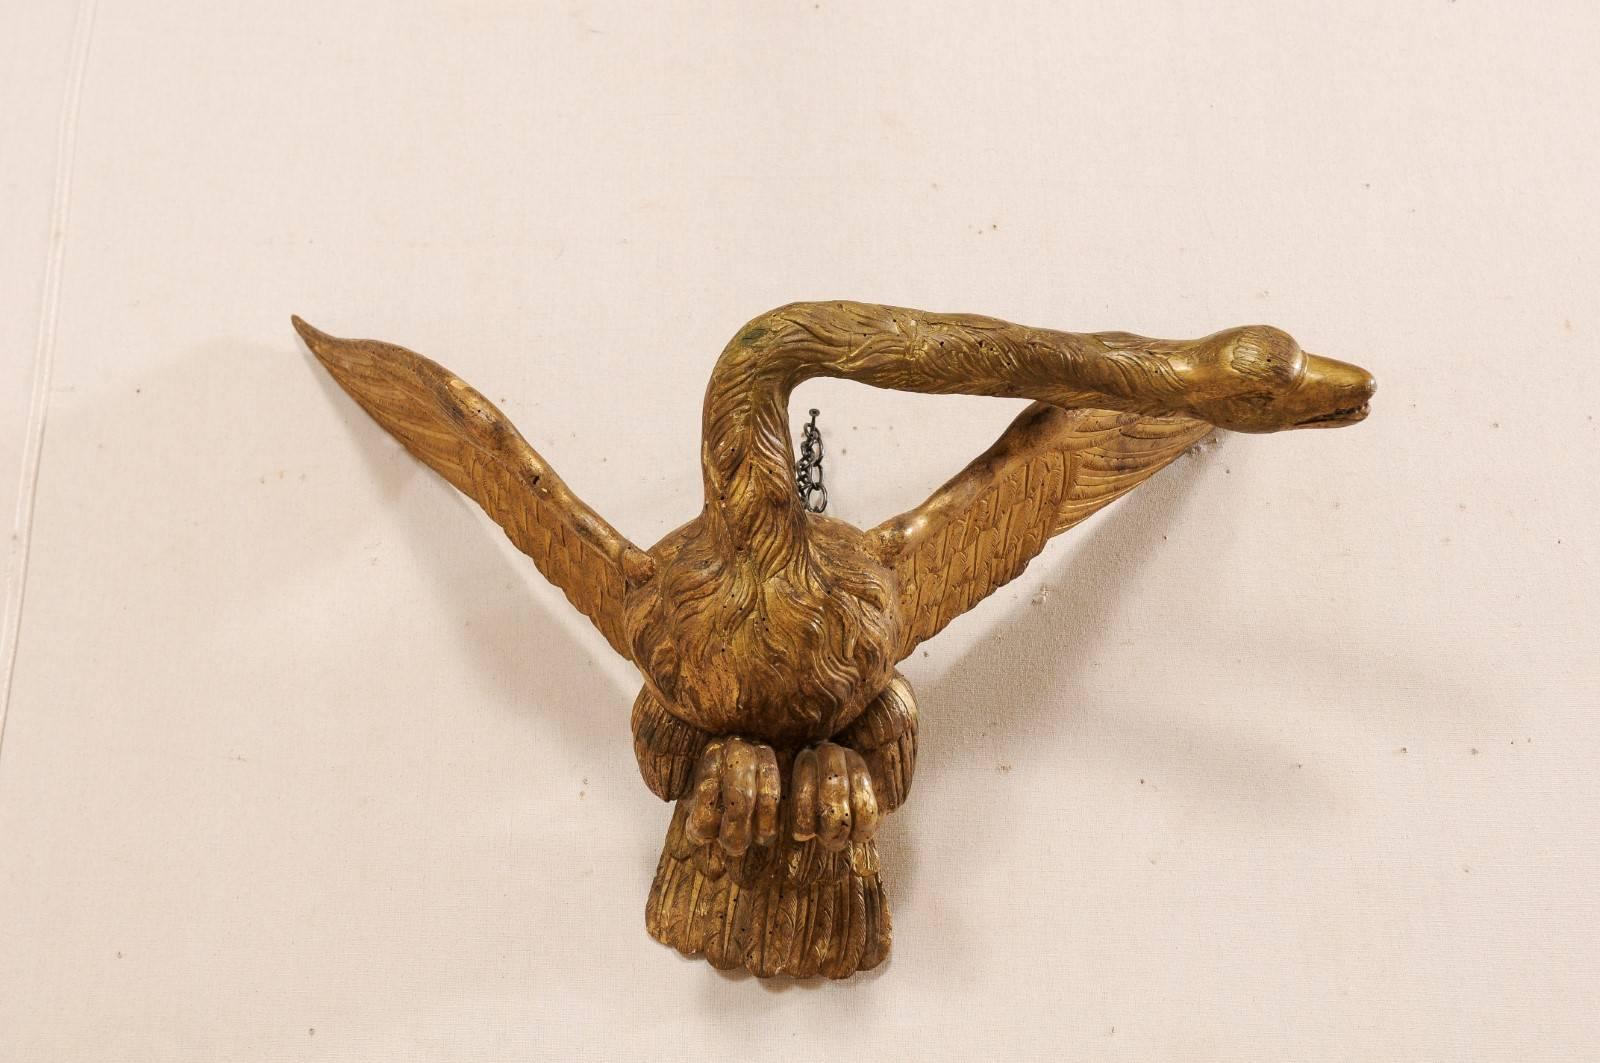 A late 18th-early 19th century Italian giltwood and carved swan. This wonderfully expressive antique swan from Italy features outstretched wings, and curled feet tucked up under it's belly as if in flight. The head is dramatically swayed and turned